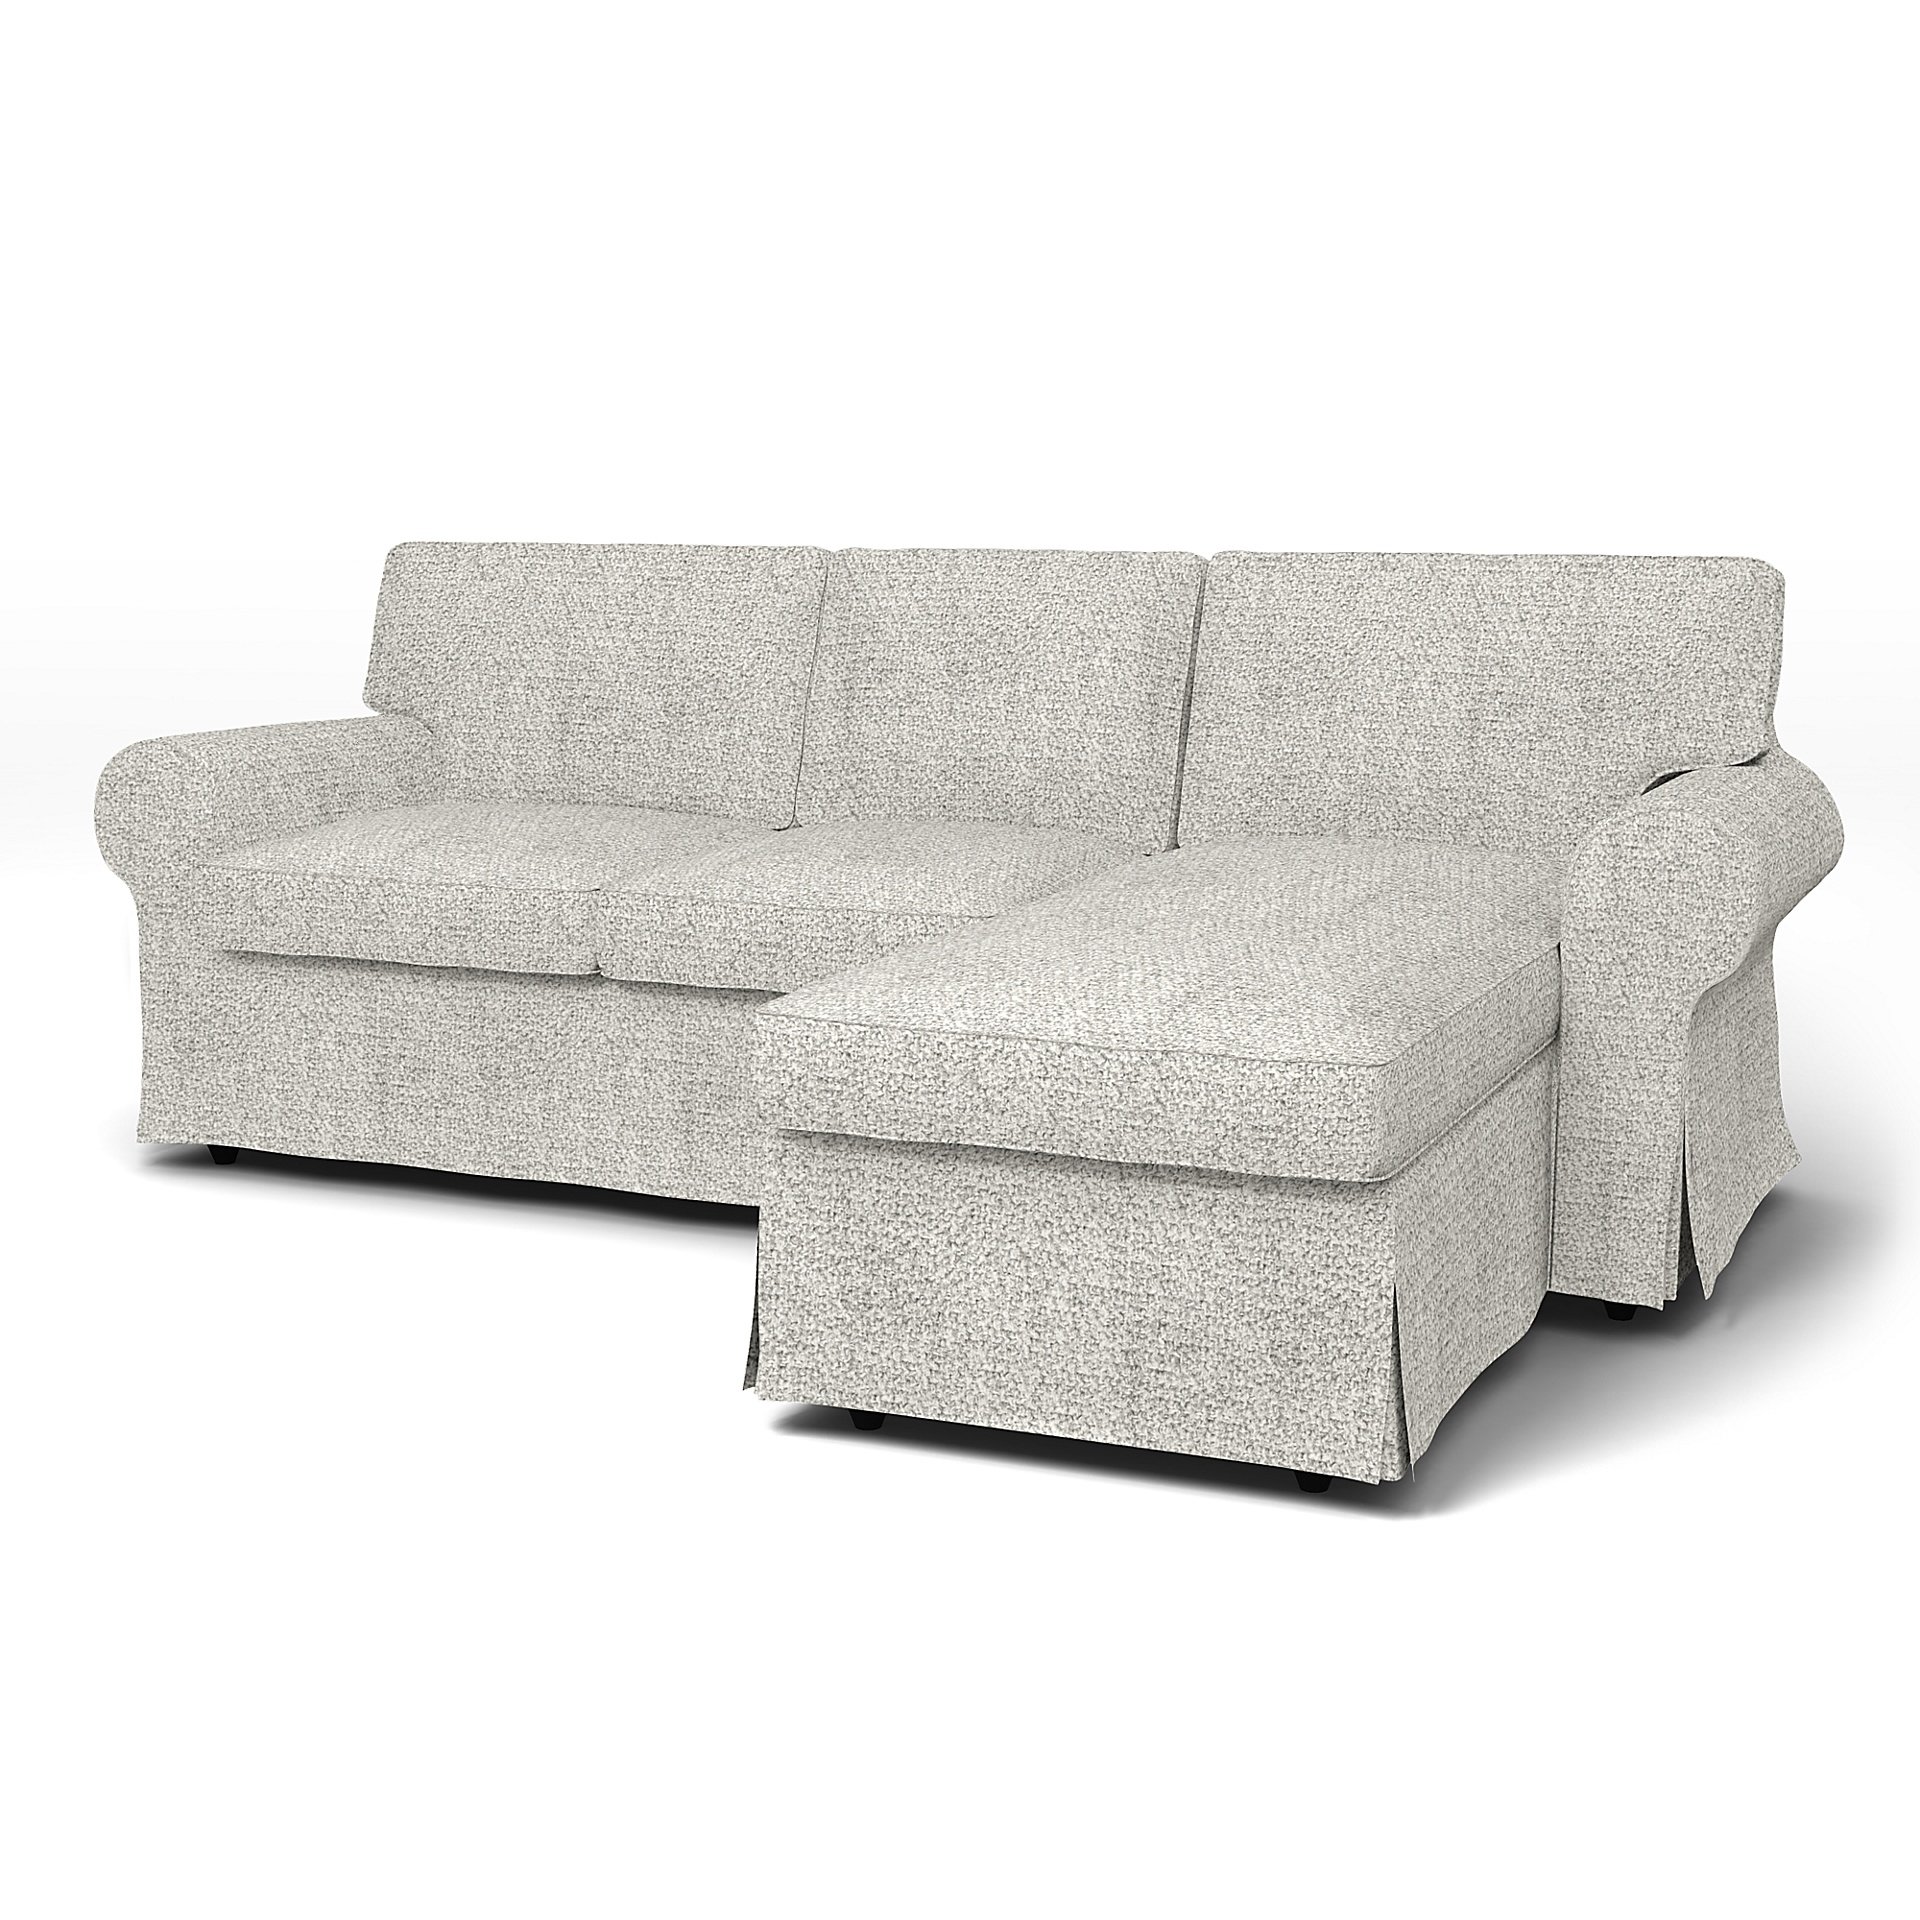 IKEA - Ektorp 3 Seater Sofa with Chaise Cover, Driftwood, Boucle & Texture - Bemz